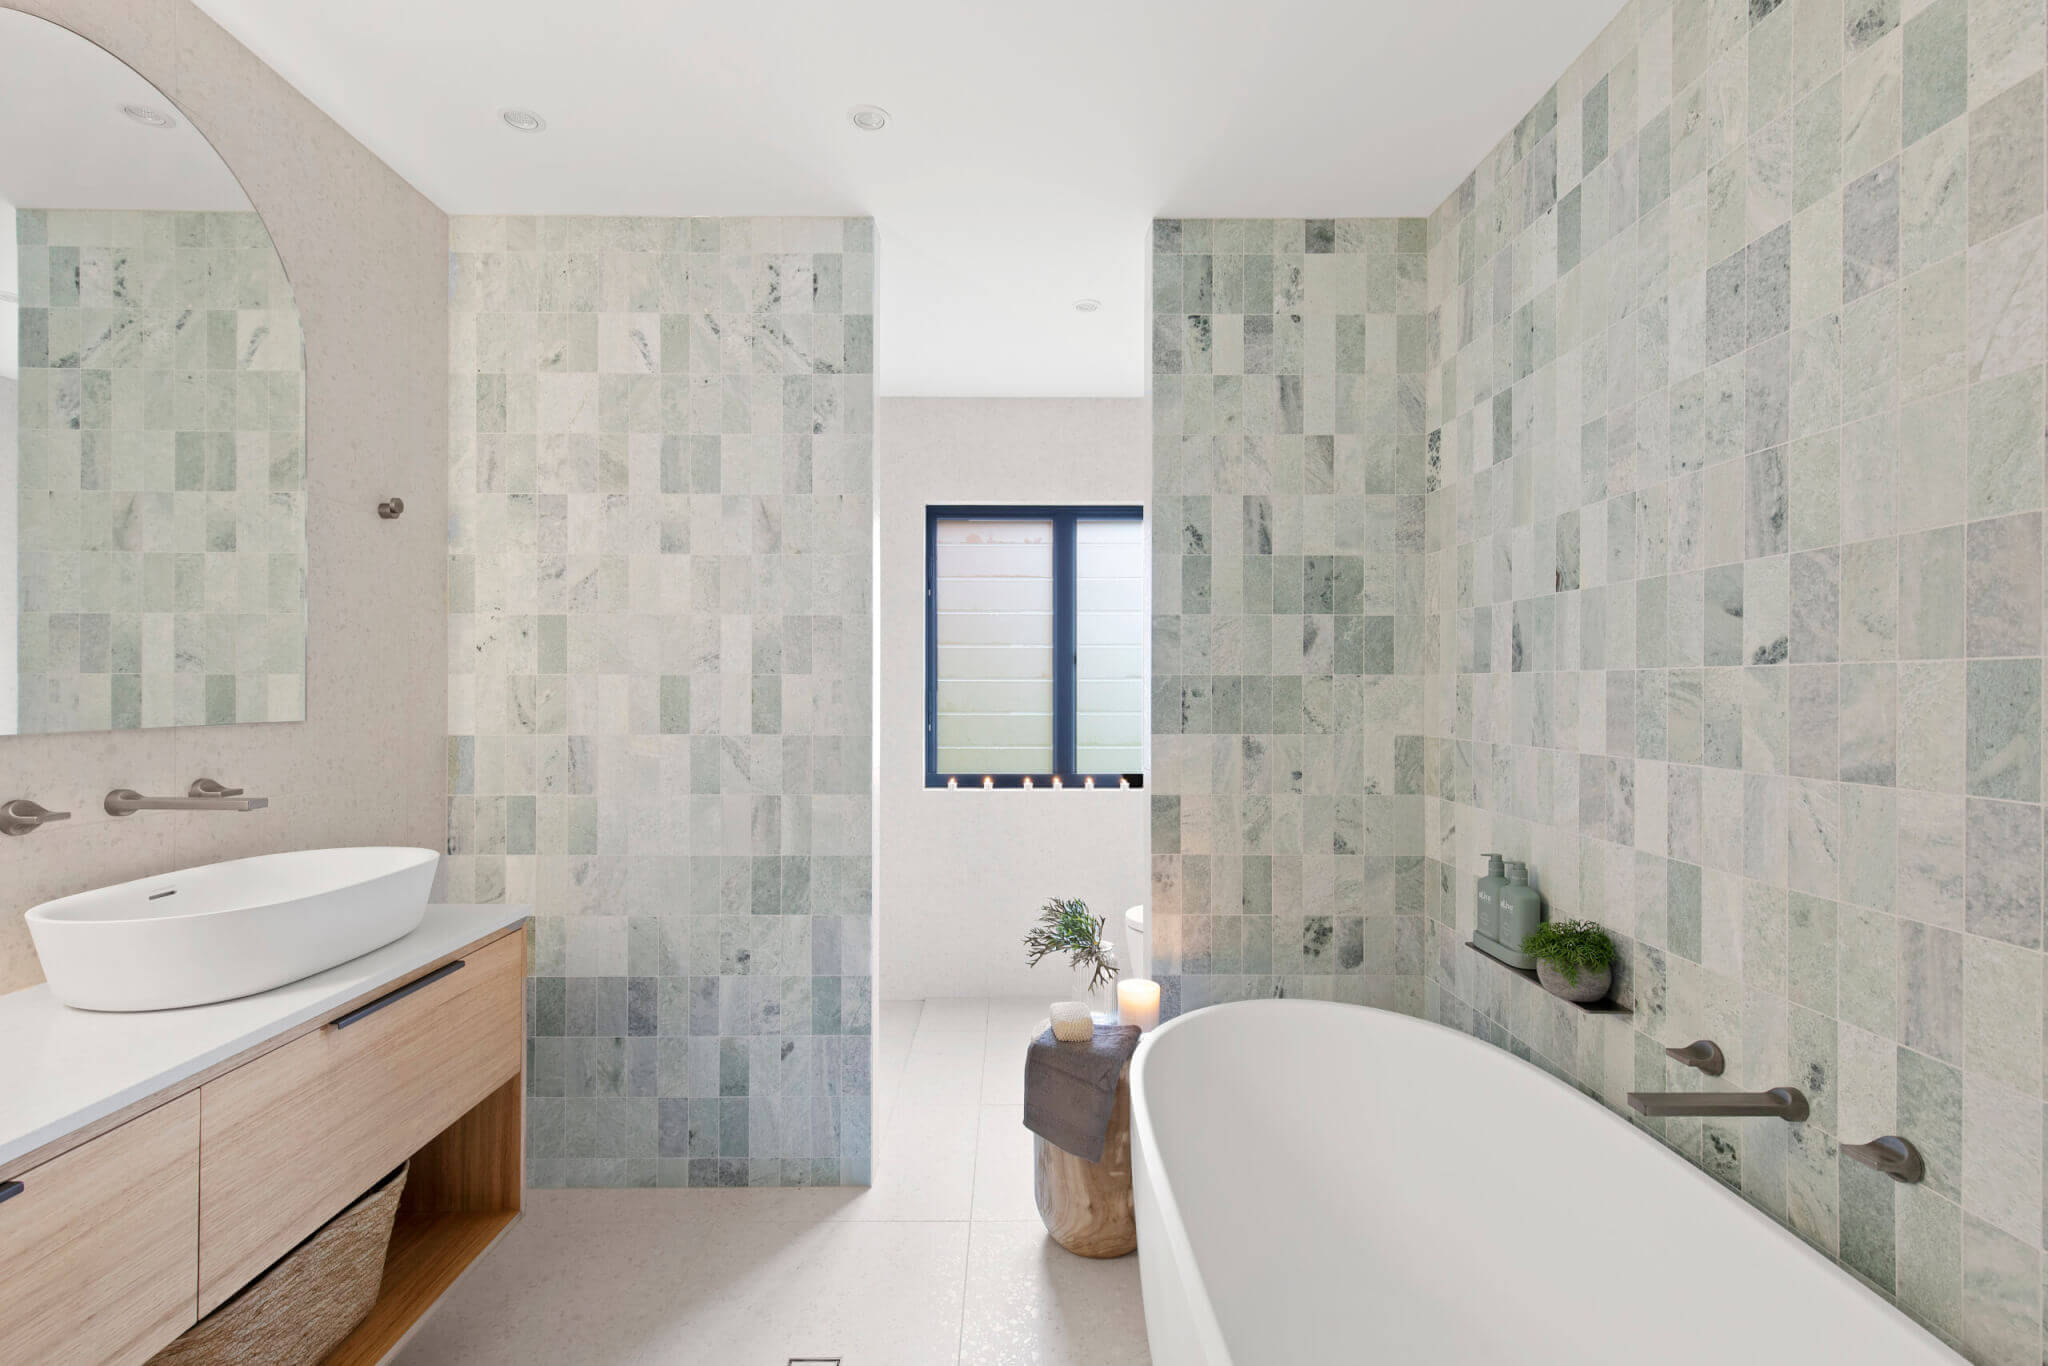 6 Bathroom Trends to Avoid in 2022